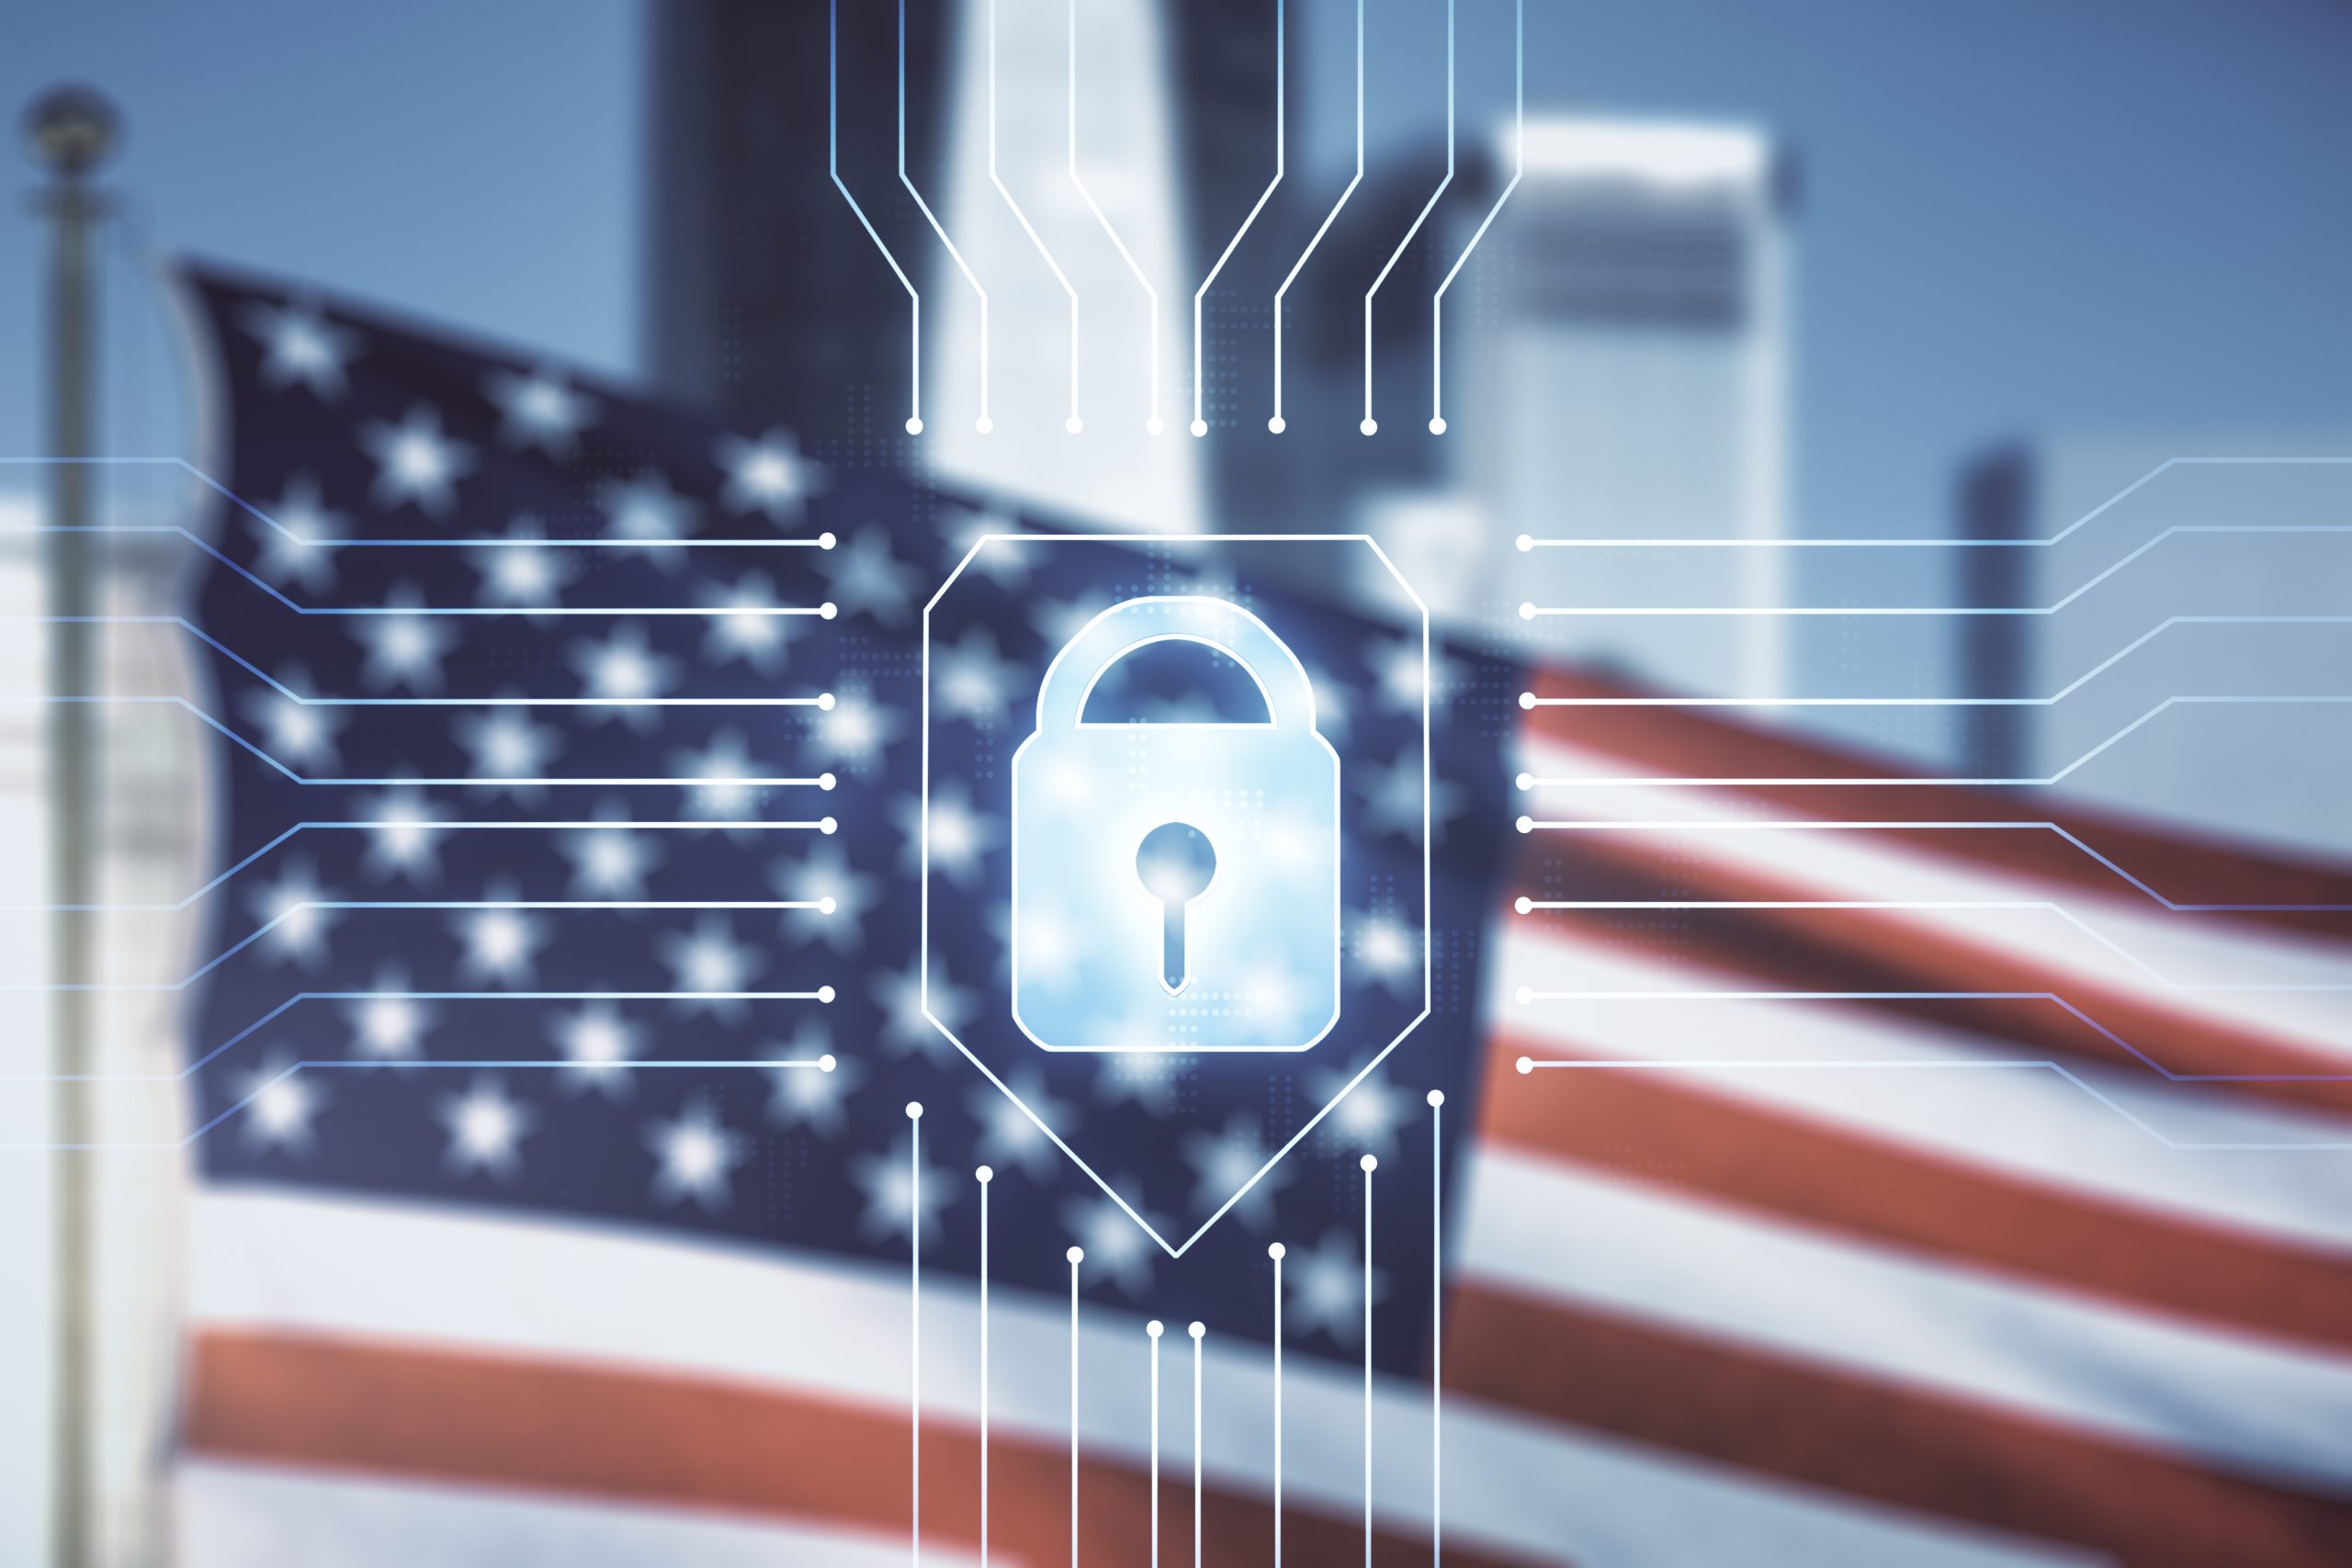 Virtual creative lock sketch with chip hologram on US flag and skyline background, protection of personal data concept. Multiexposure